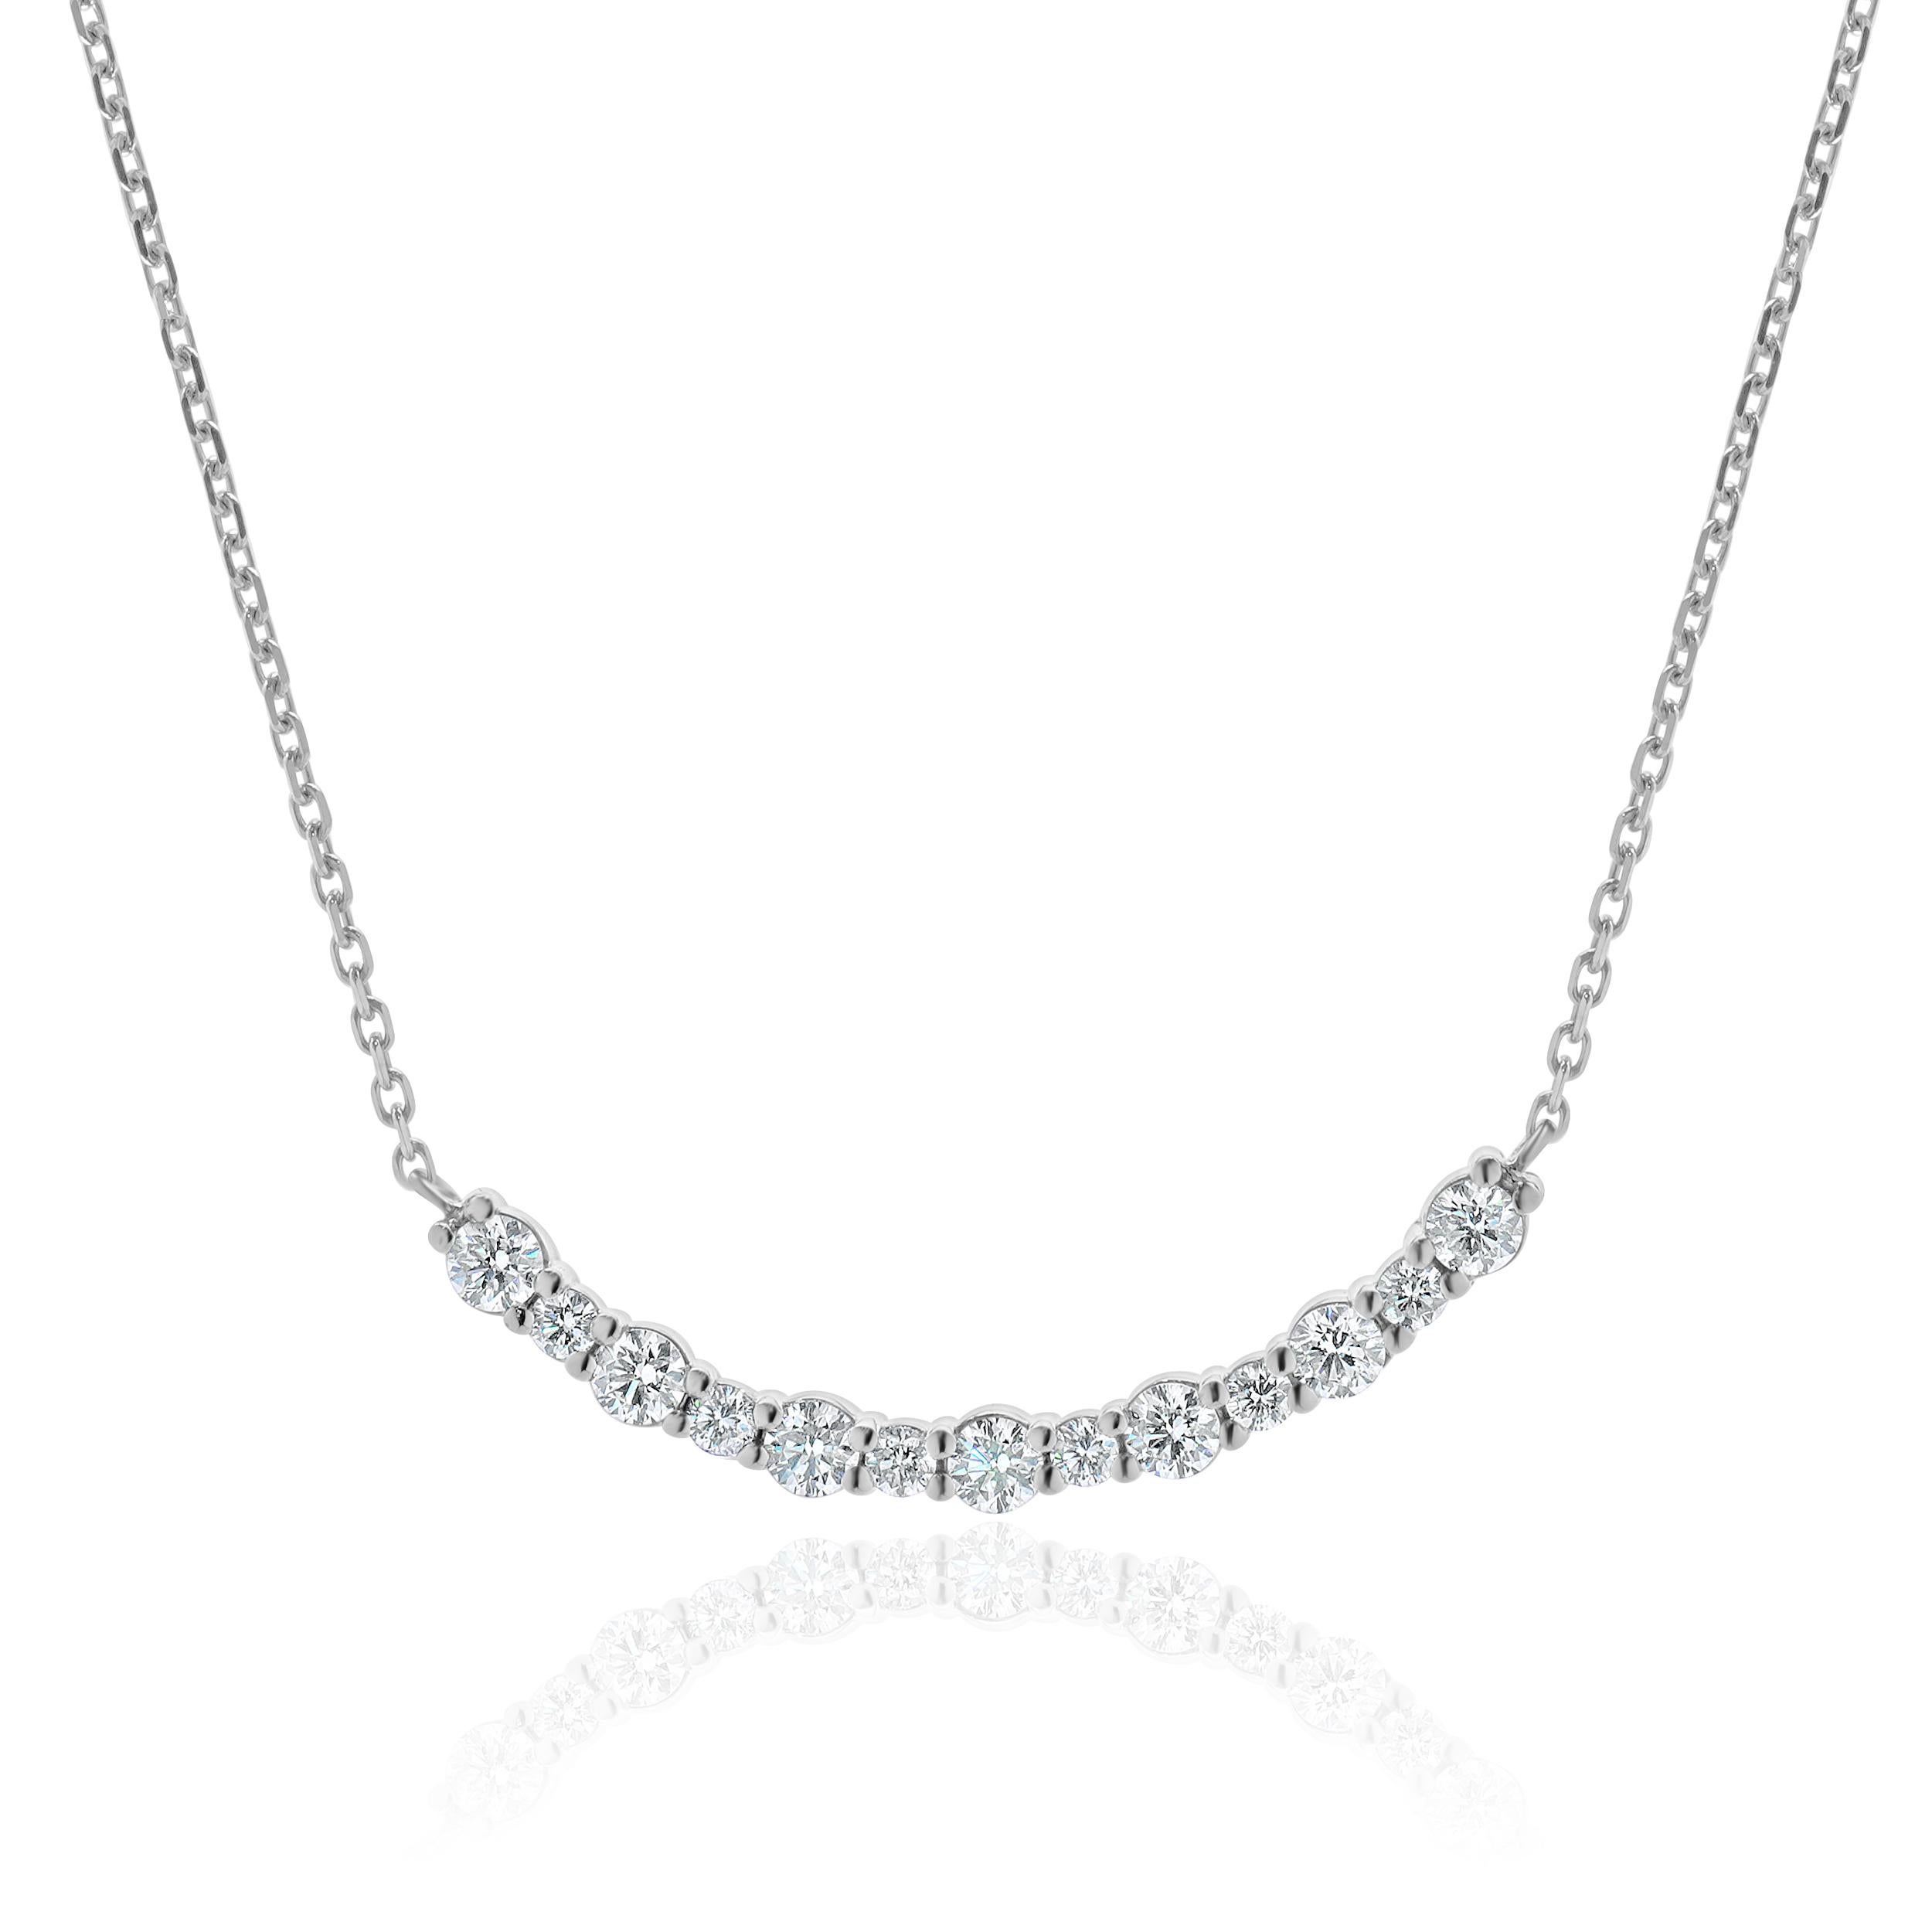 Designer: custom
Material: 14K white gold
Diamonds: 13 round brilliant cut = 1.15cttw
Color: I
Clarity: SI1
Dimensions: necklace measures 18-inches in length 
Weight: 4.42 grams
